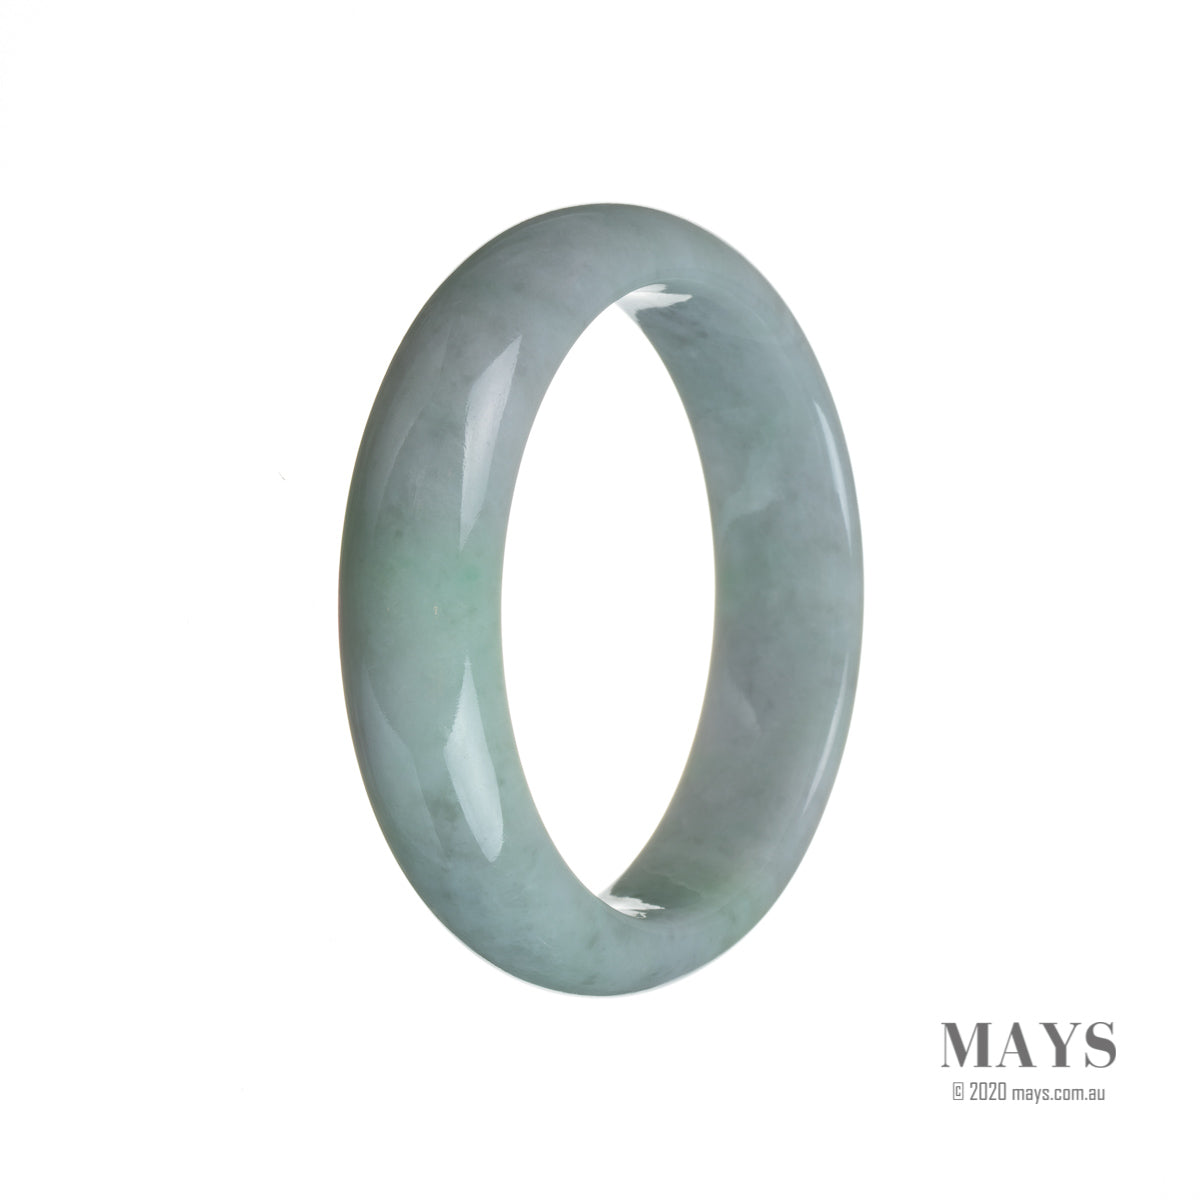 A beautiful lavender jade bangle with a semi-round shape, made from genuine Type A jadeite jade, measuring 56mm in diameter. From MAYS GEMS.